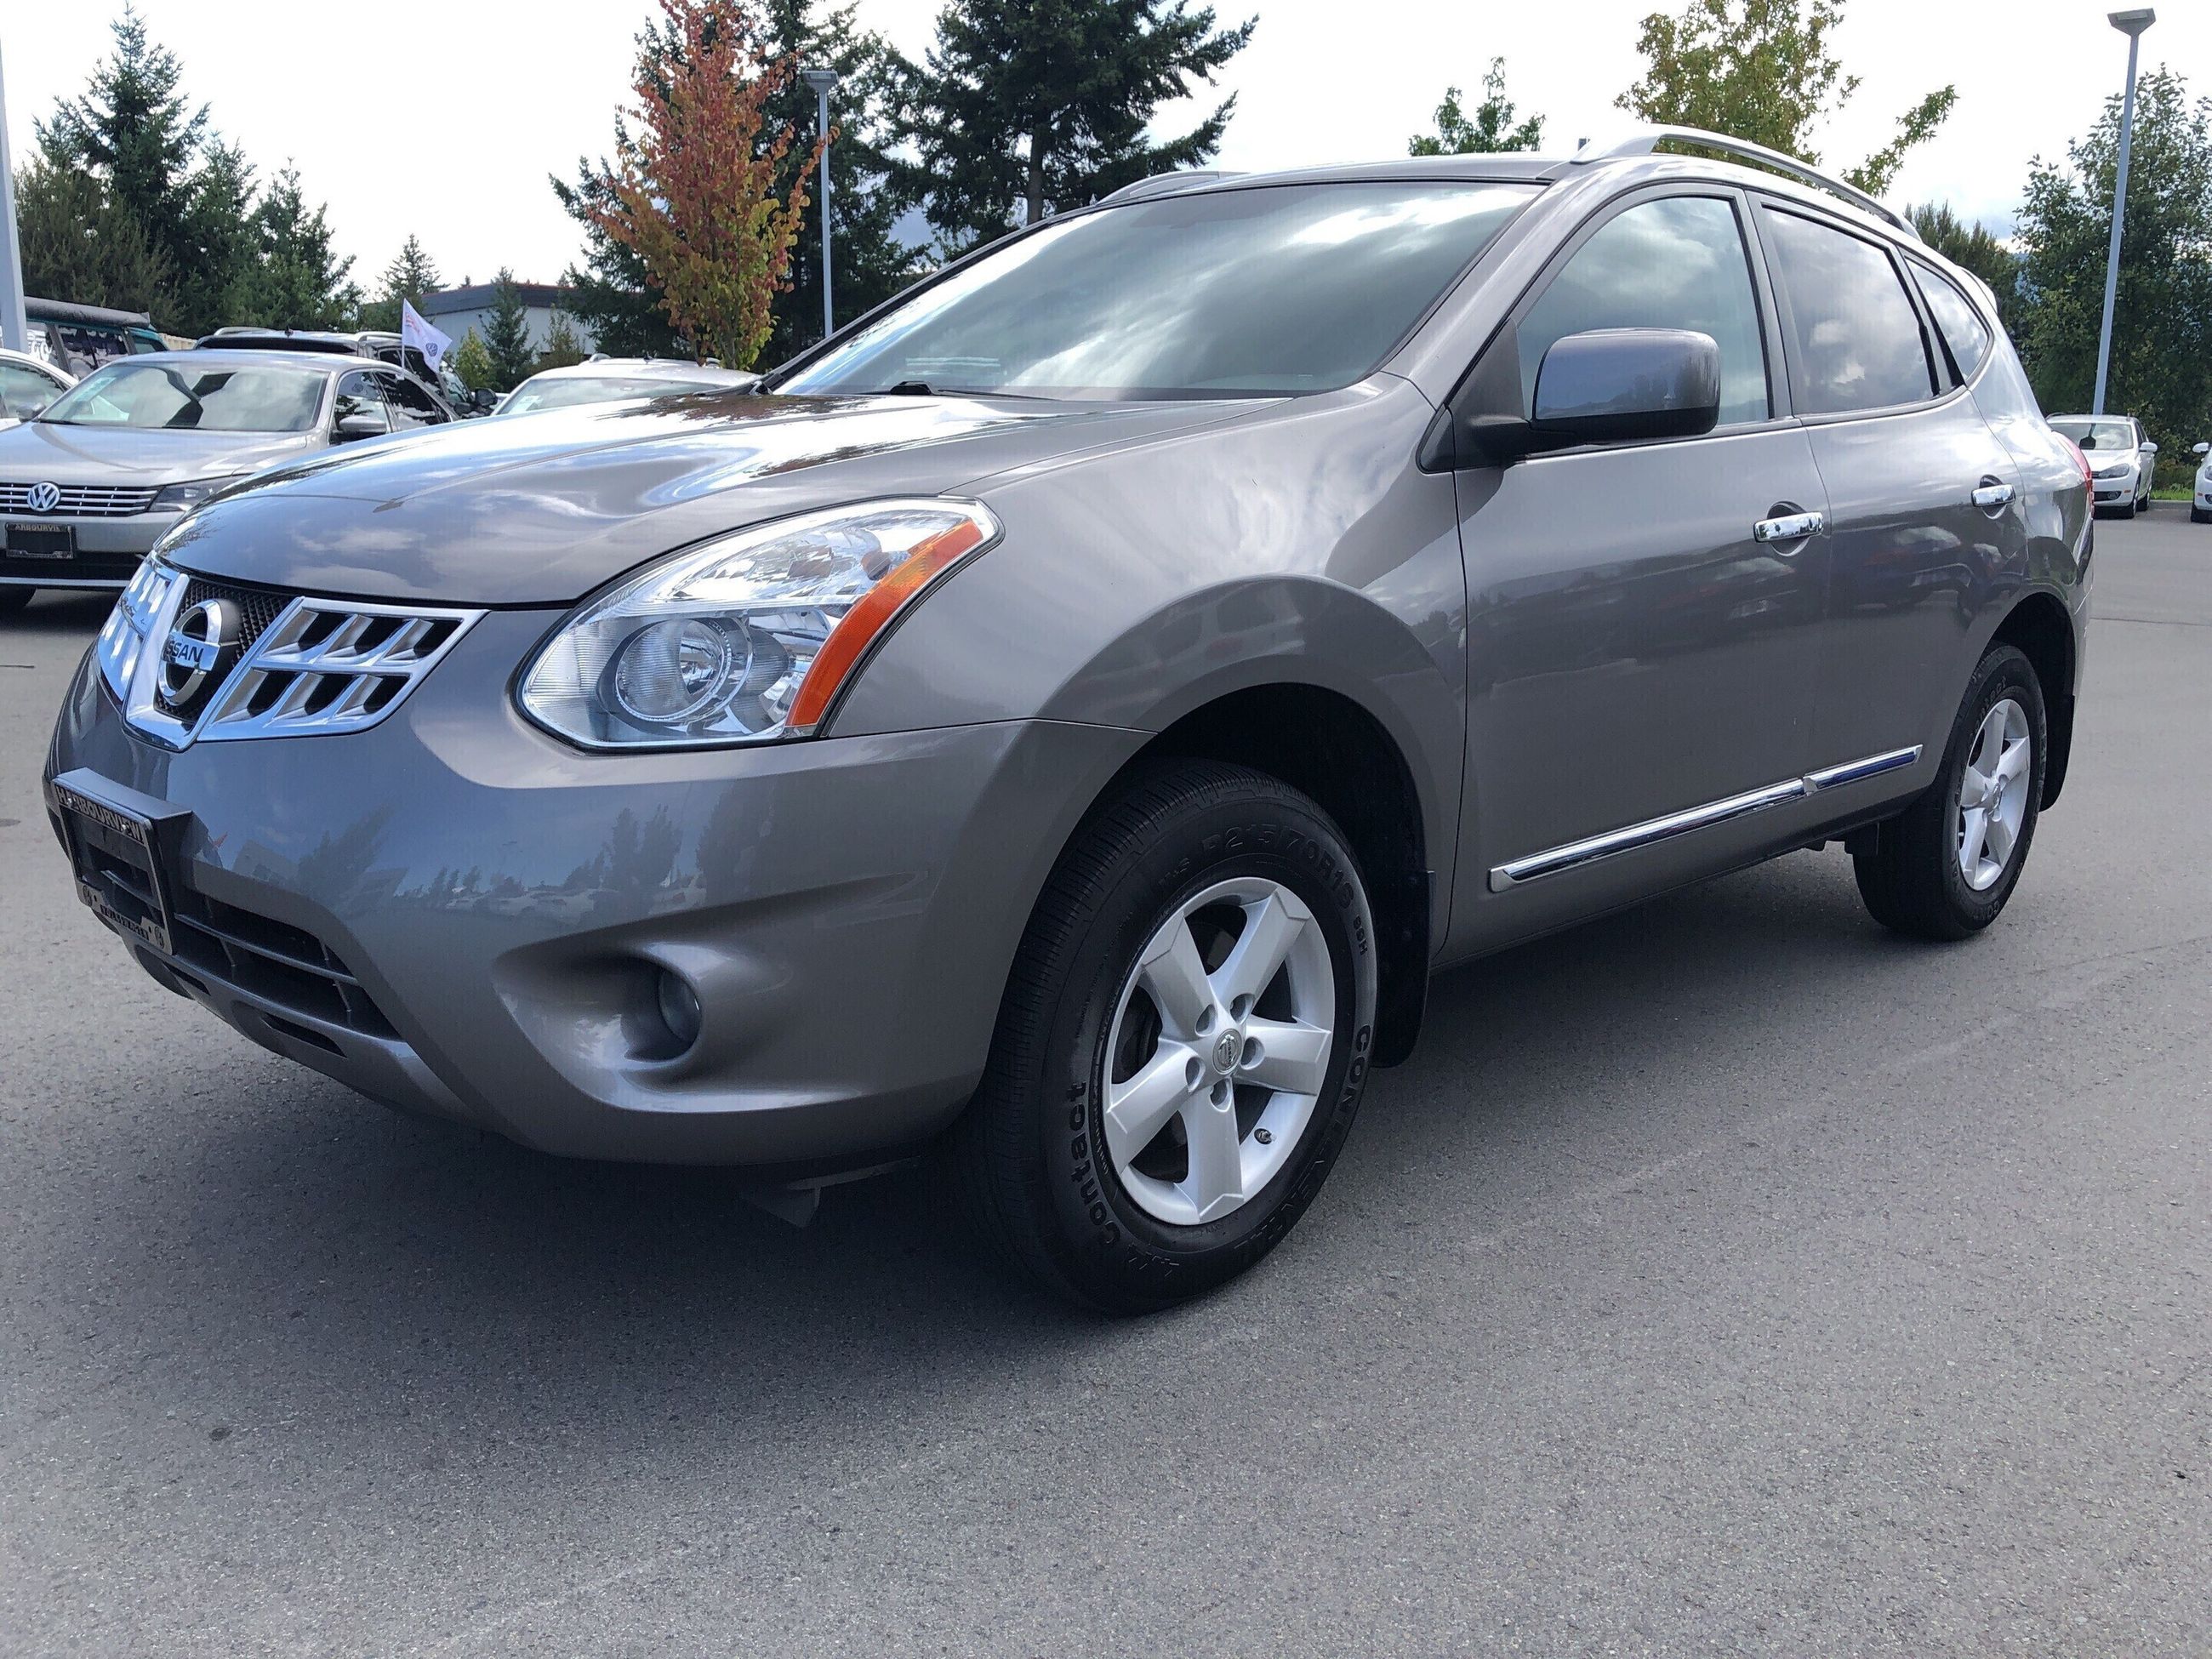 Used 2013 Nissan Rogue S for Sale - $12888 | Harbourview VW